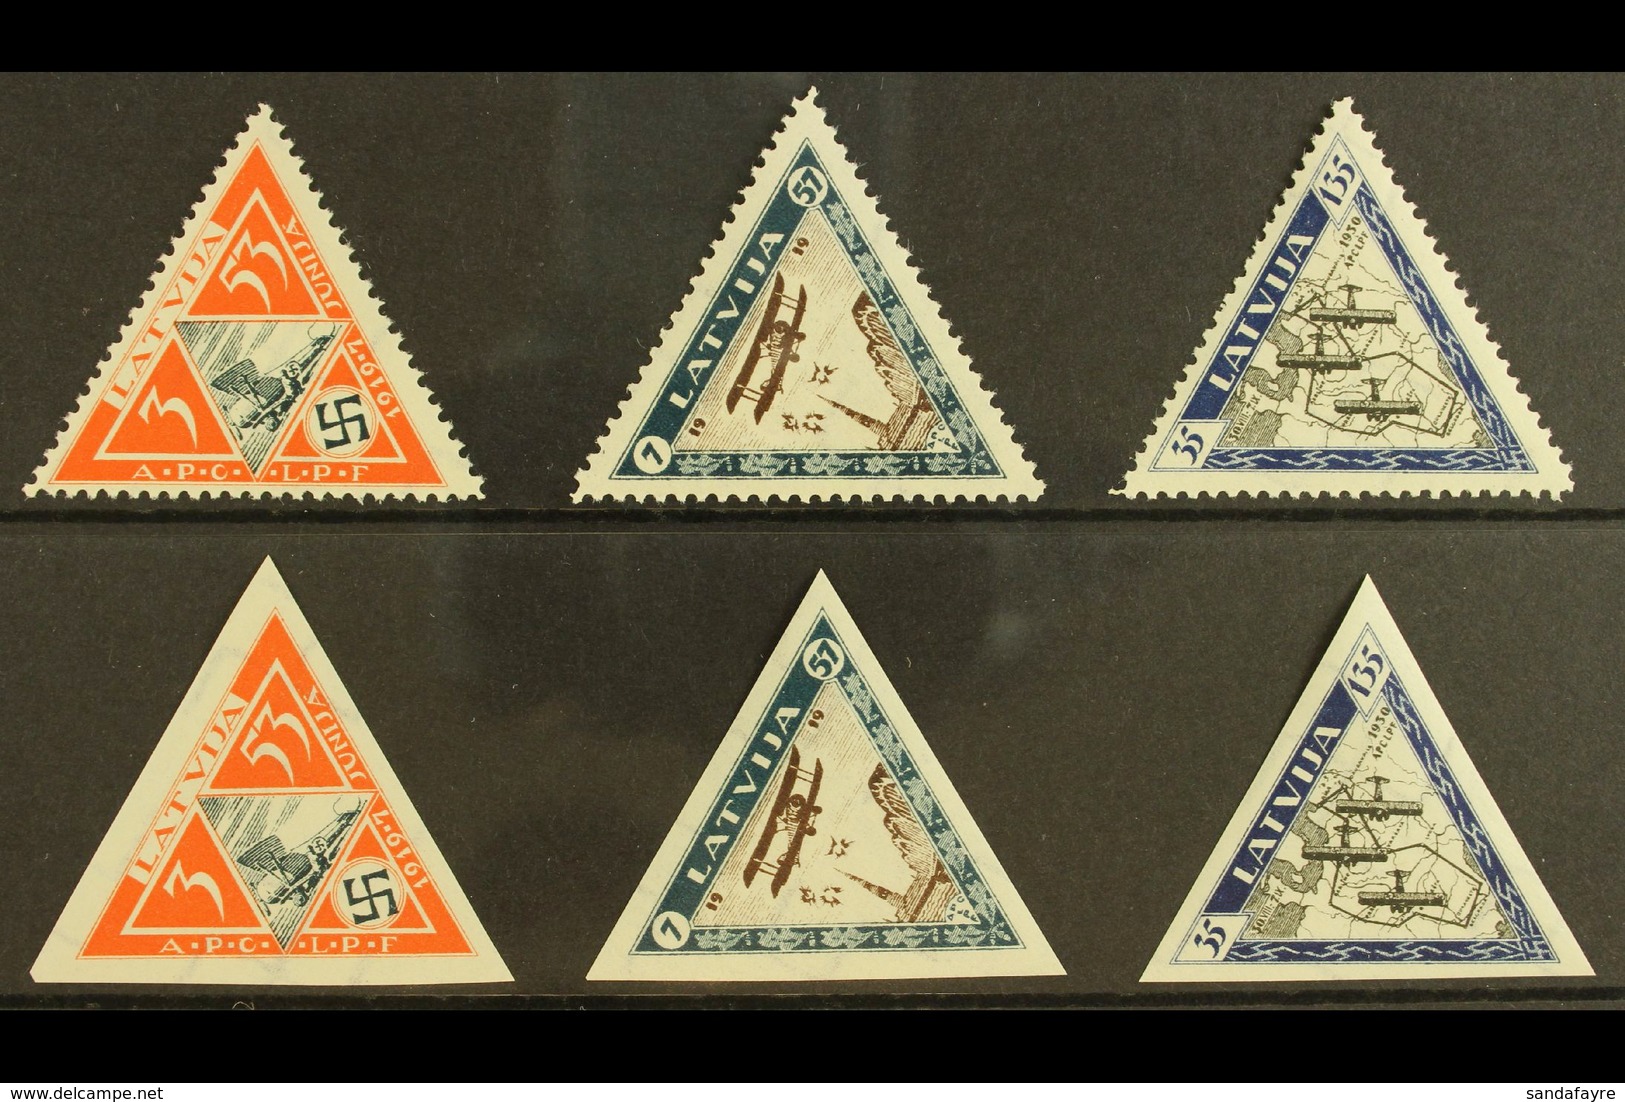 1933 Wounded Airmen Triangular Perforated & Imperforate Sets, Mi 225A/227A & 225B/227B, SG 240A/42A & 240B/42B, Fine Min - Letland